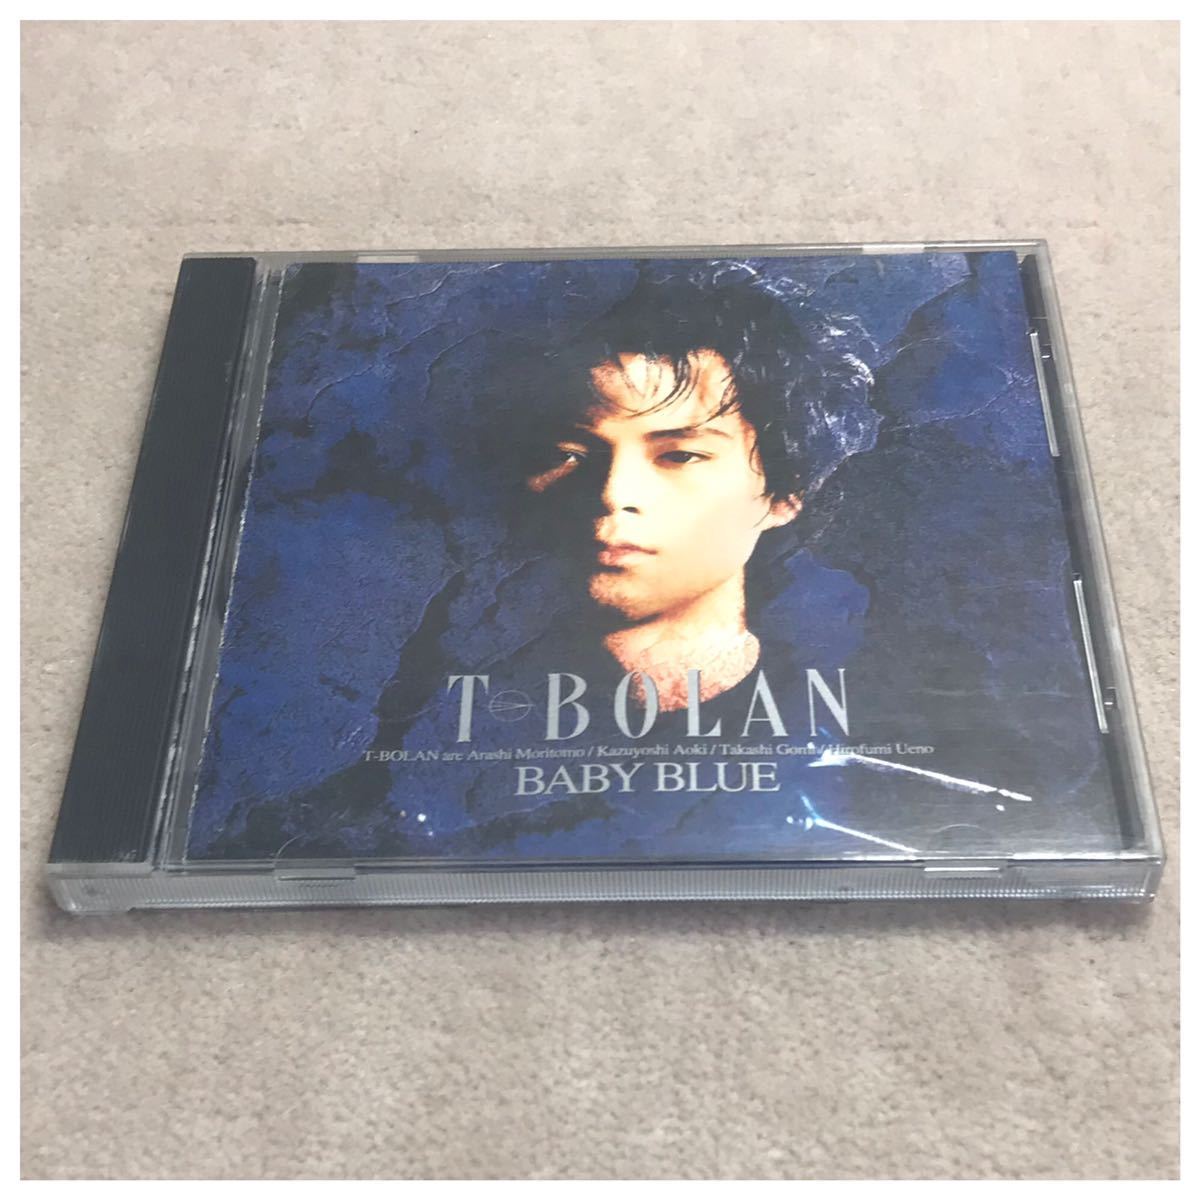 Baby Blue / T-BOLAN《帯付き》